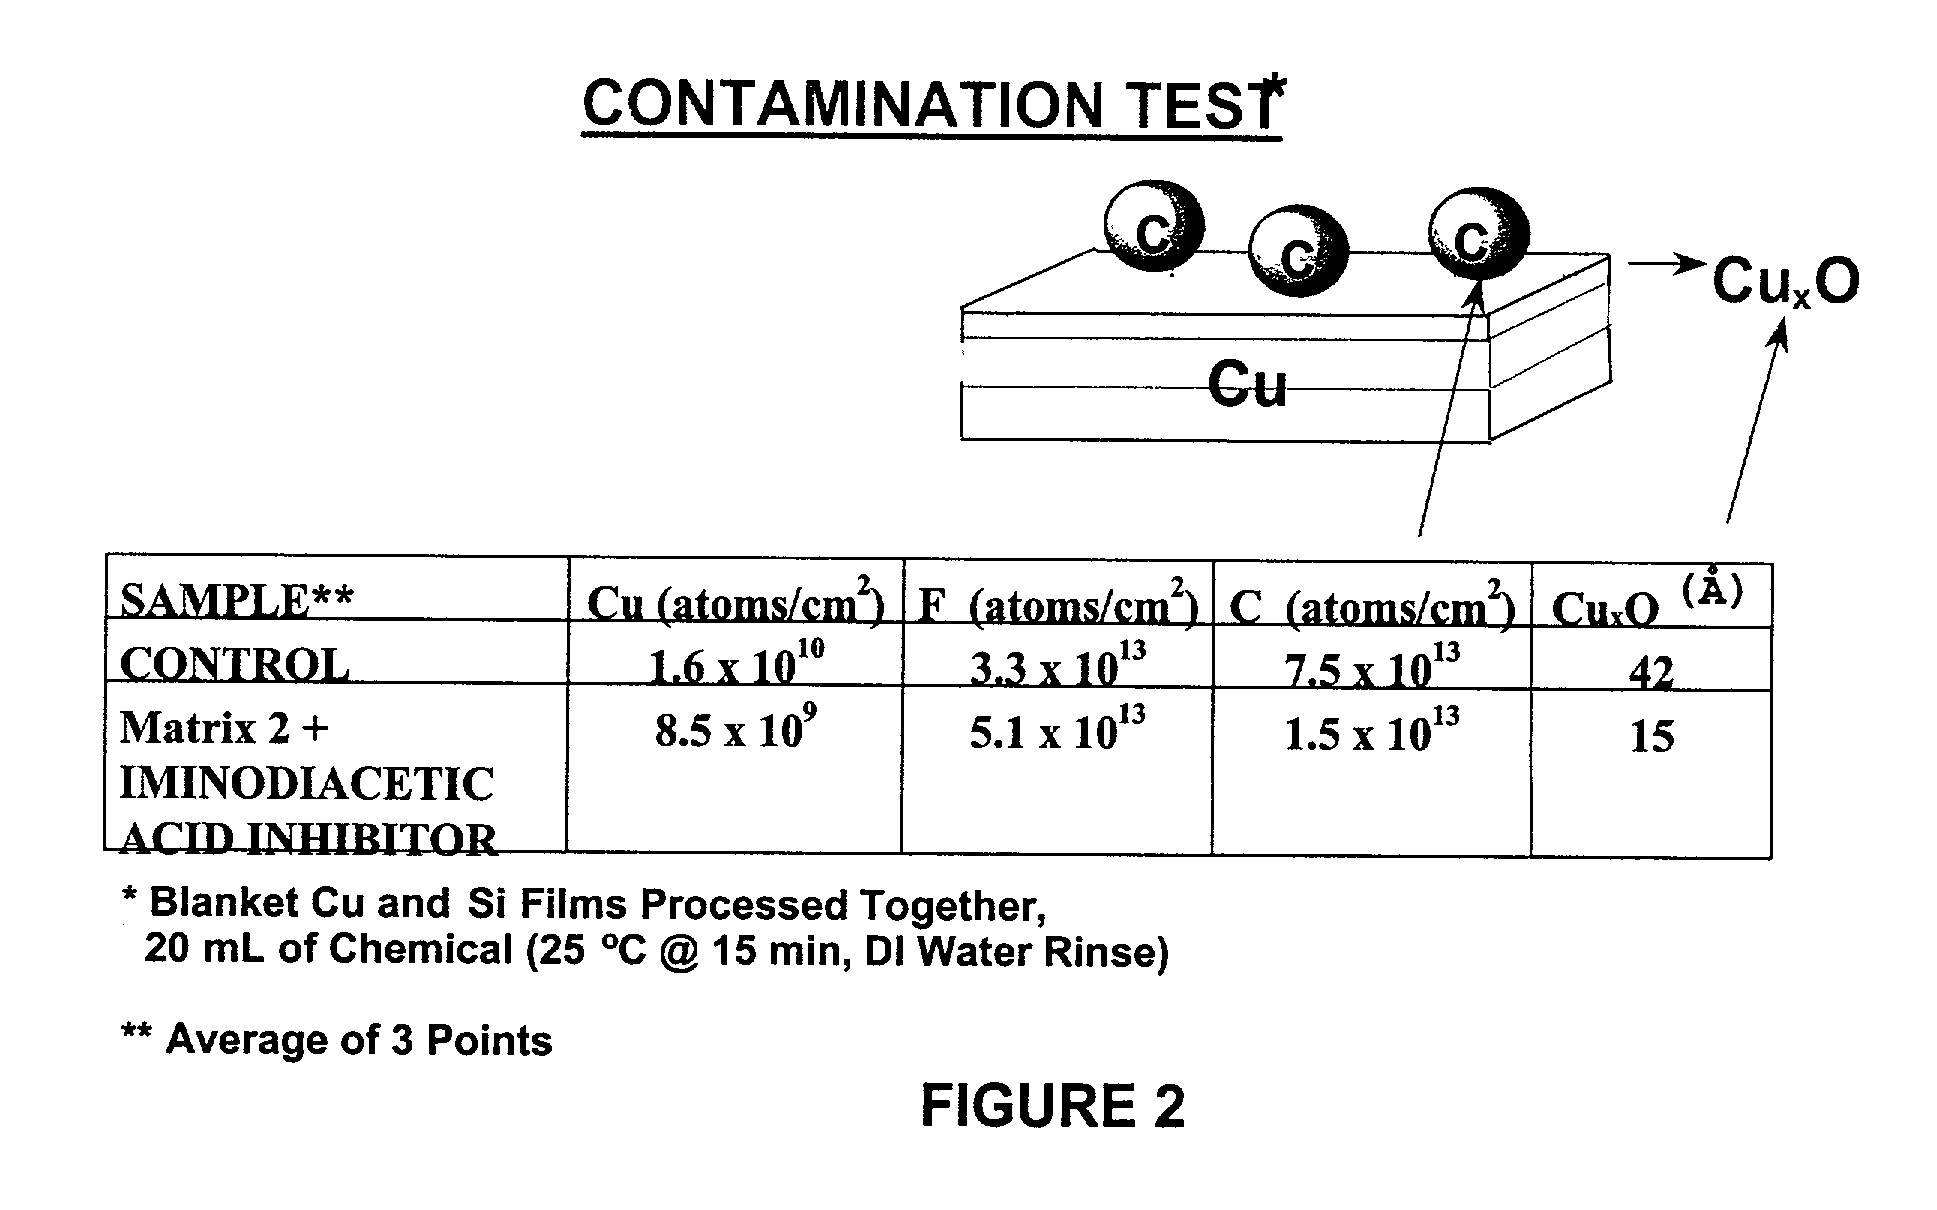 Aqueous cleaning composition containing copper-specific corrosion inhibitor for cleaning inorganic residues on semiconductor substrate